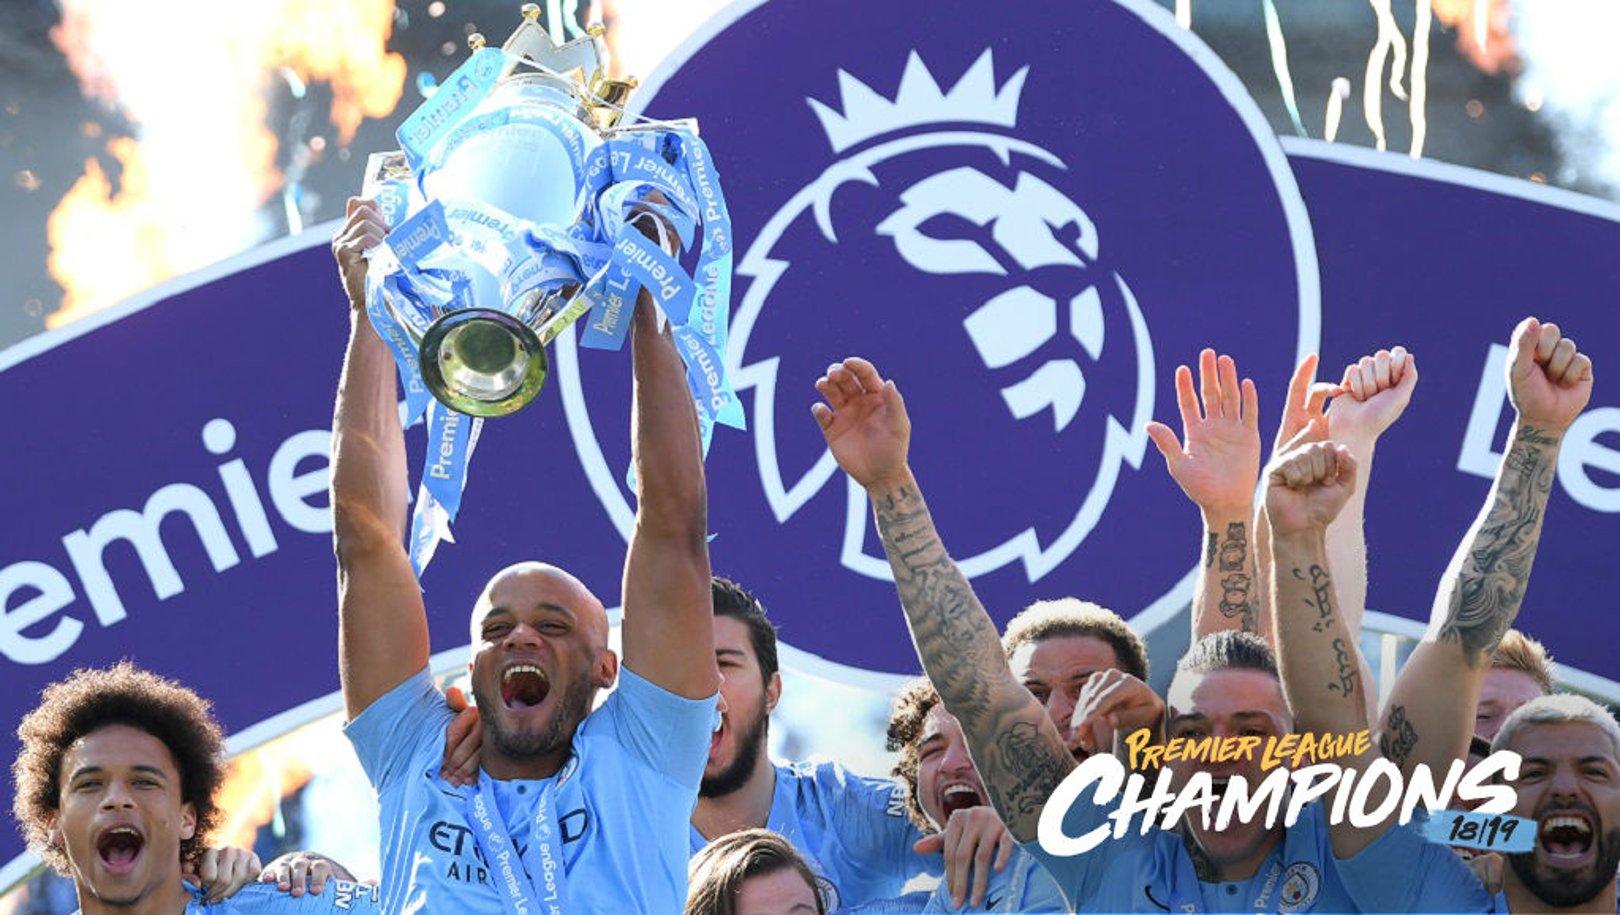 Kompany: 'This was the most satisfying title yet'